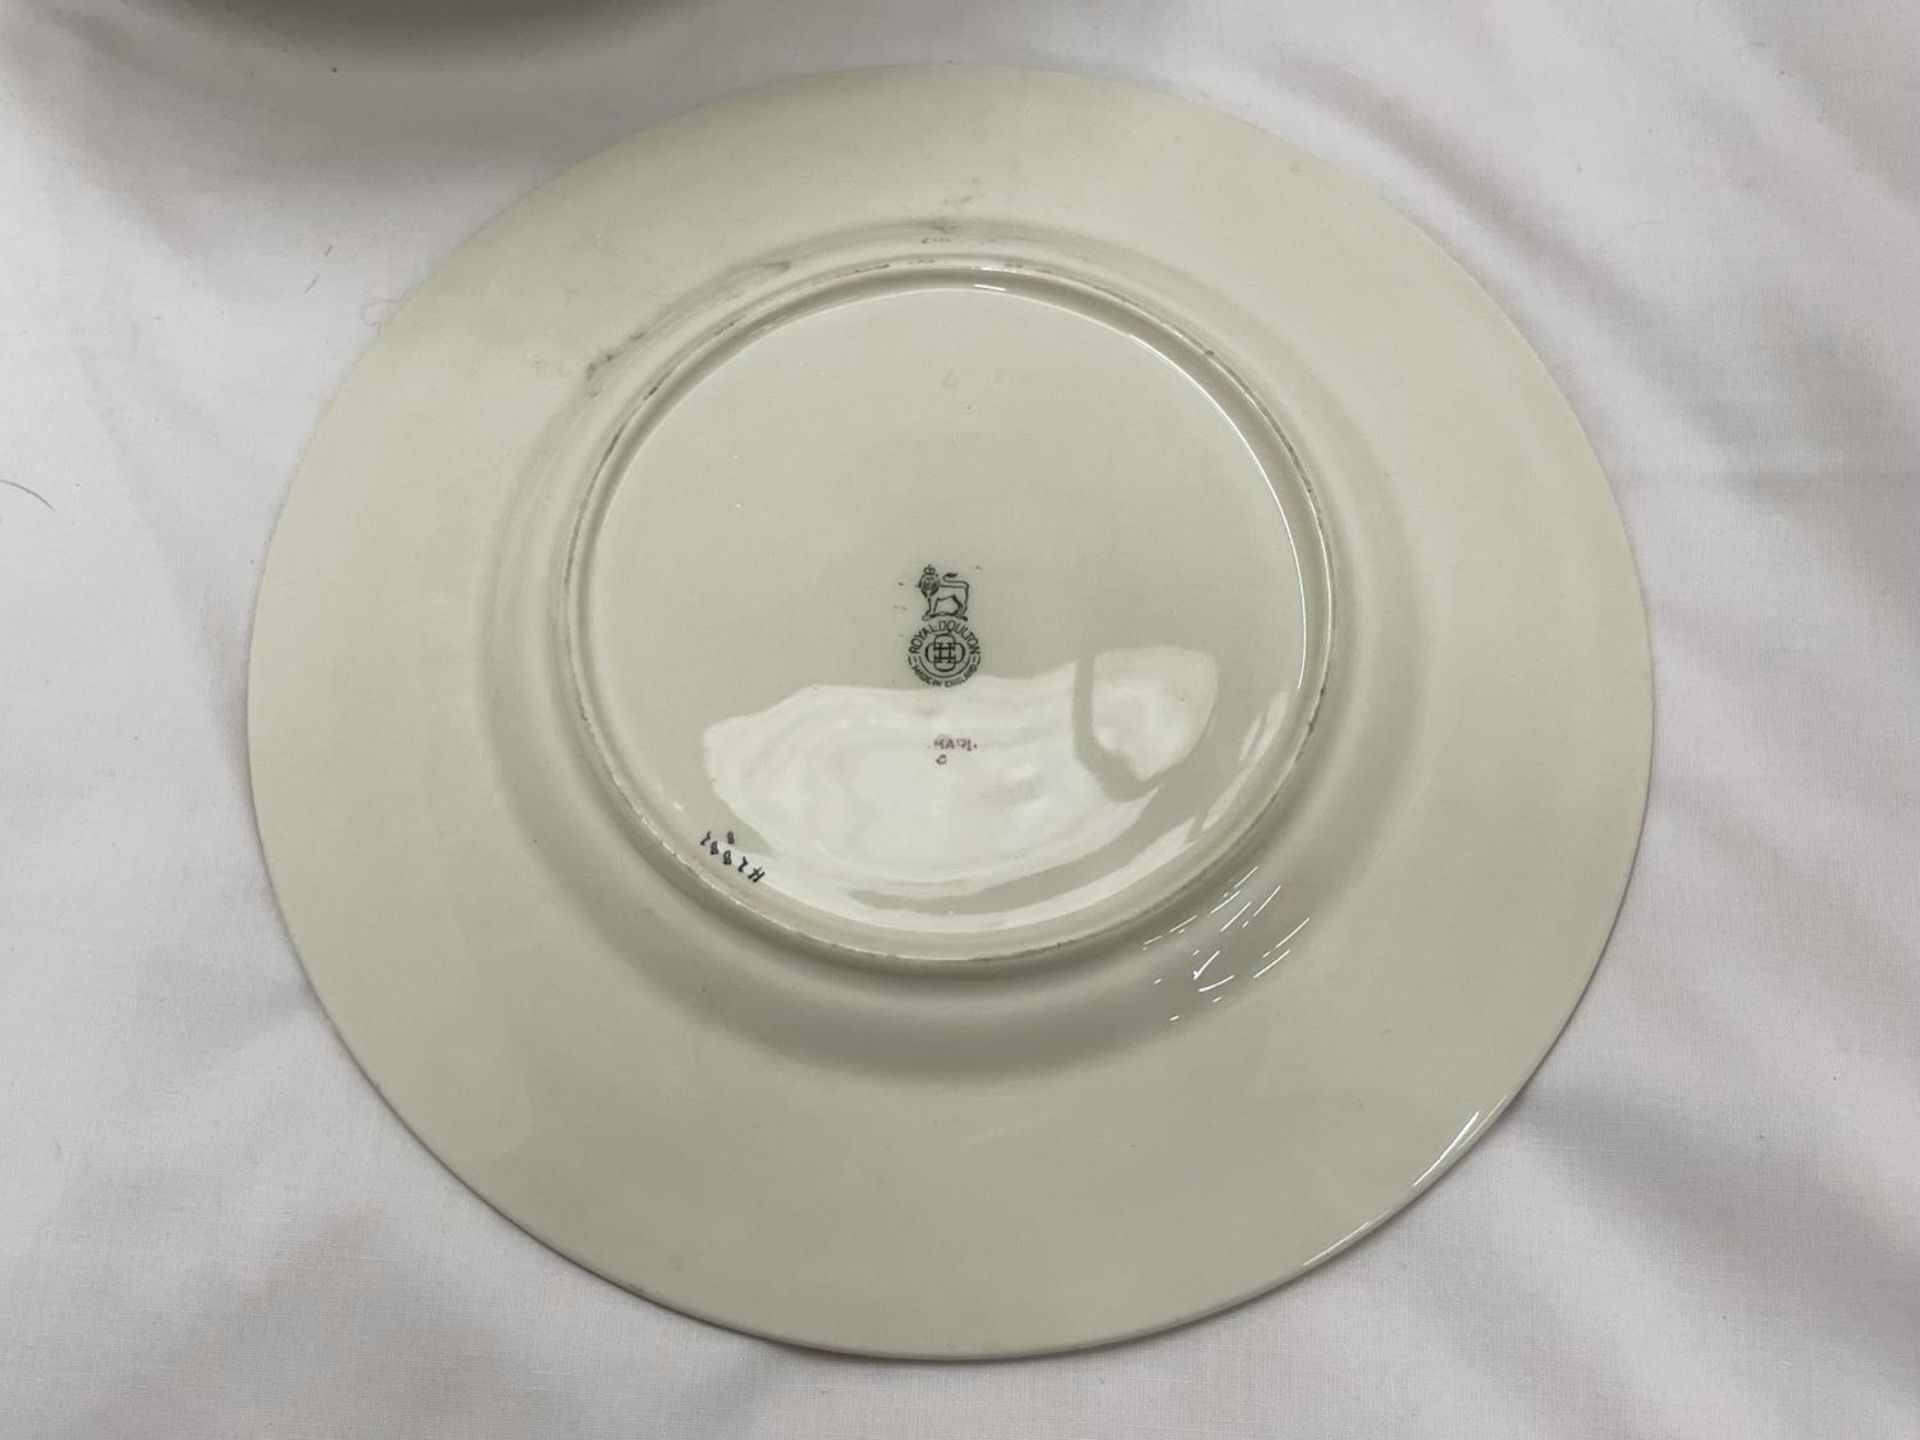 A CHROME CAKE STAND WITH THREE ROYAL DOULTON FLORAL PLATES - Image 3 of 4